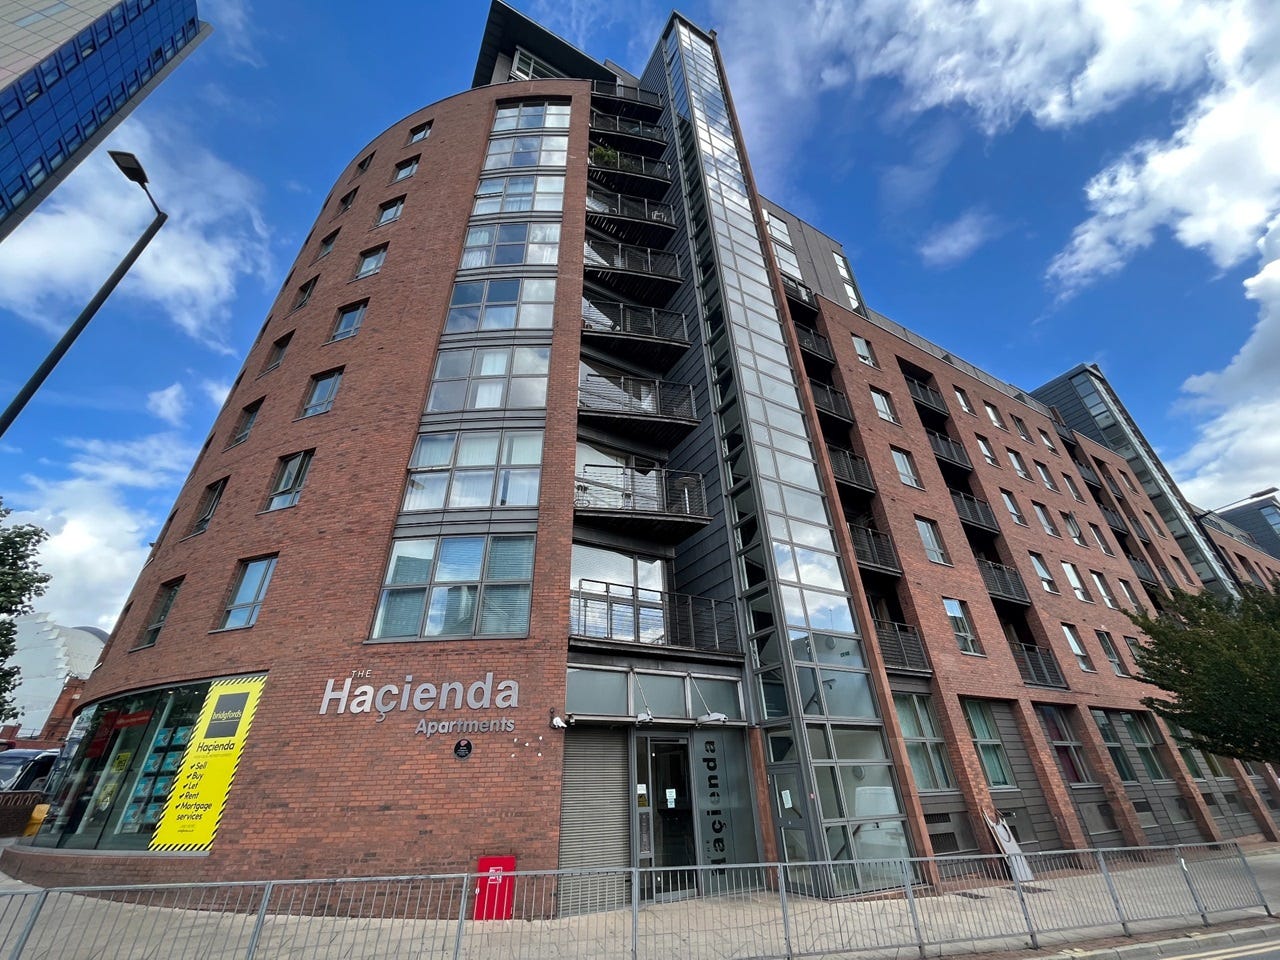 The front of Hacienda Apartments in Manchester